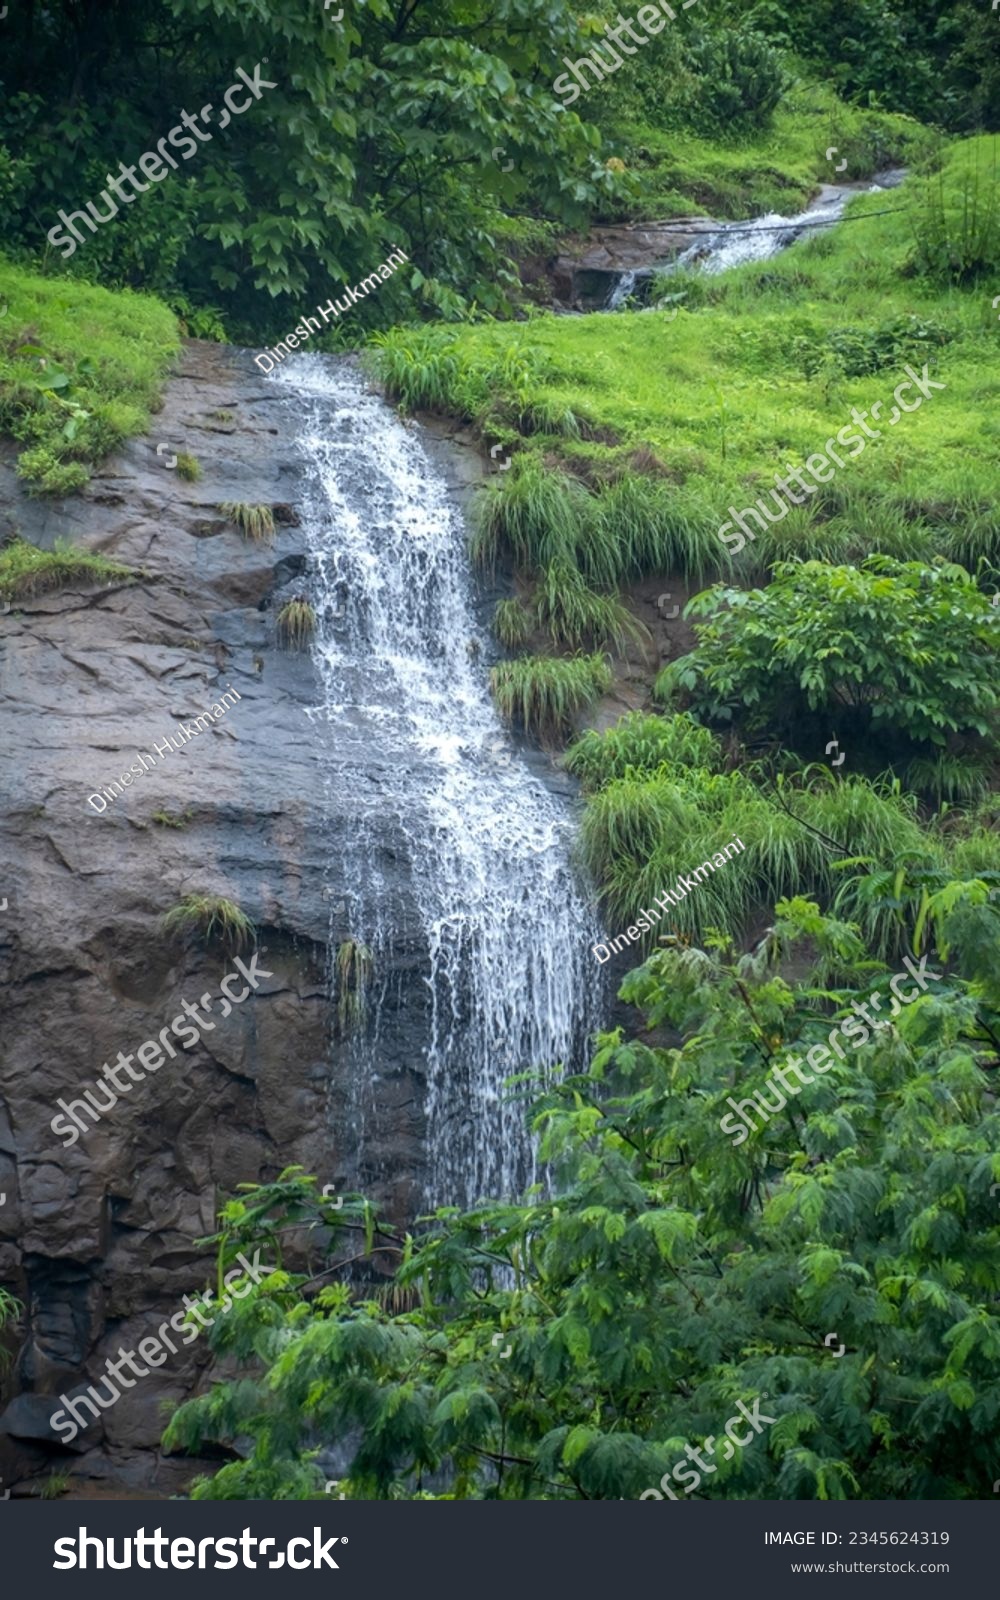 Aerial footage of a monsoon season waterfall near Pune India. Monsoon is the annual rainy season in India from June to September. #2345624319